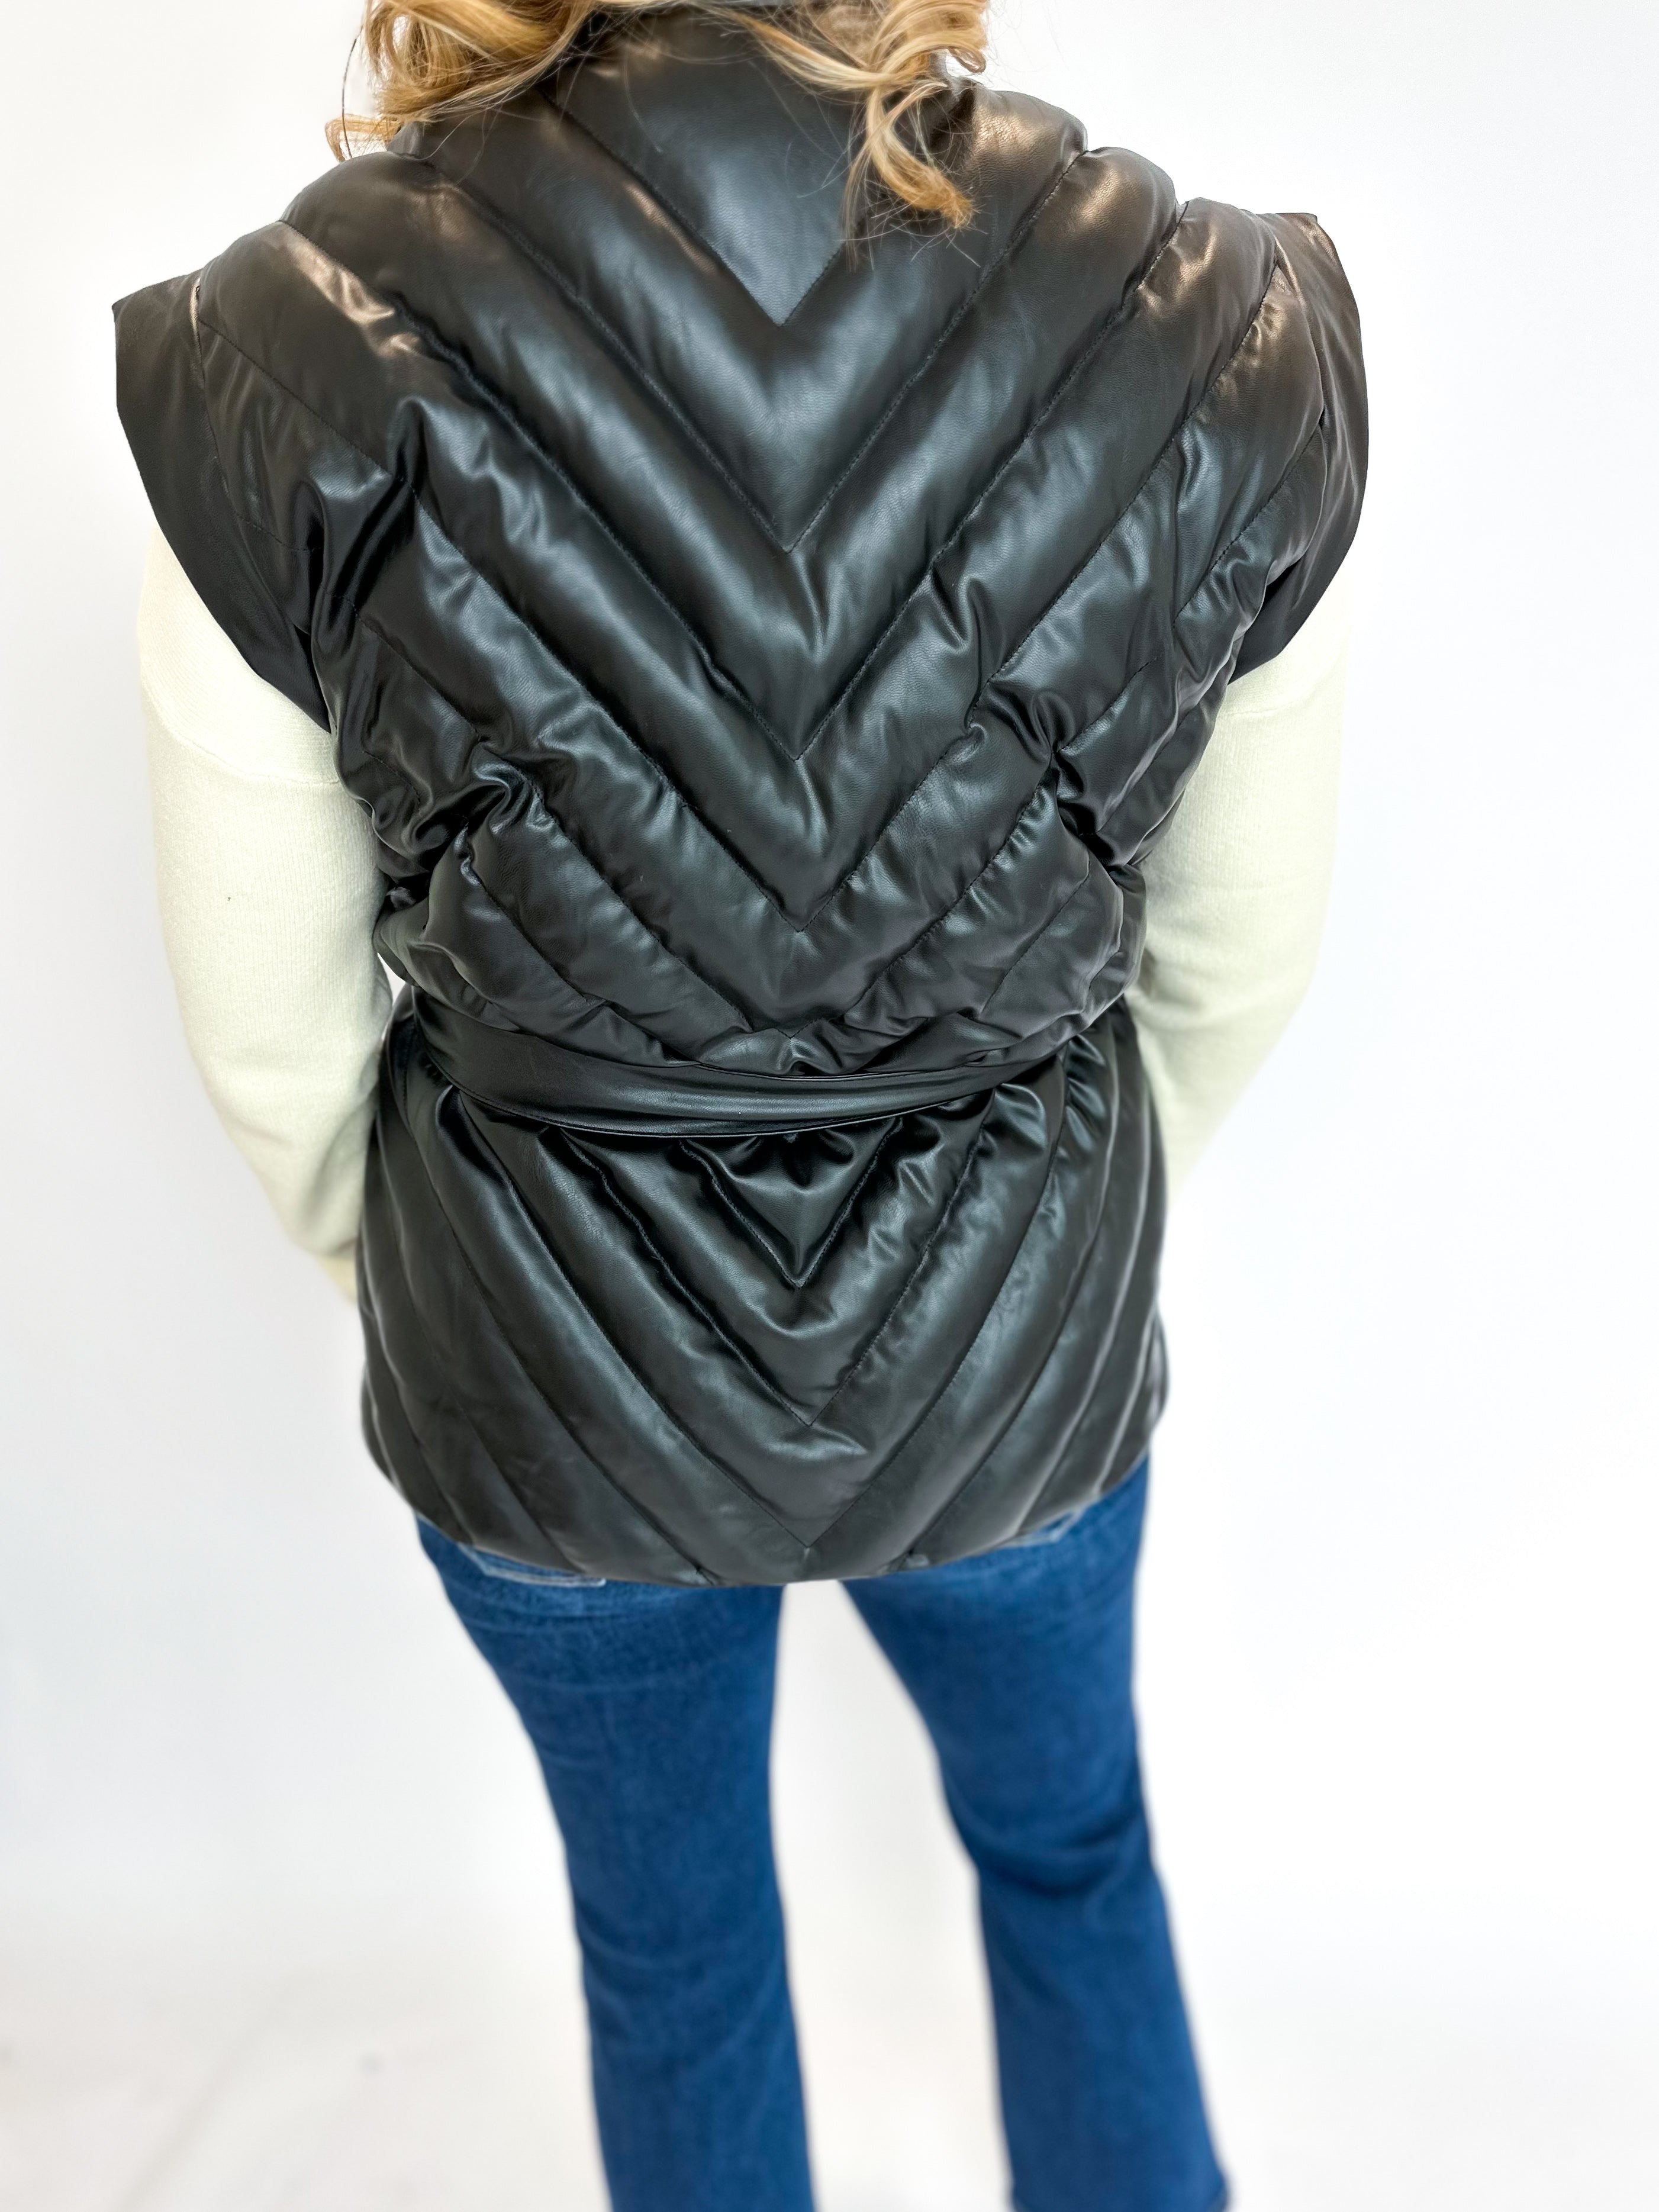 Edgy Puff Vest-600 Outerwear-FATE-July & June Women's Fashion Boutique Located in San Antonio, Texas